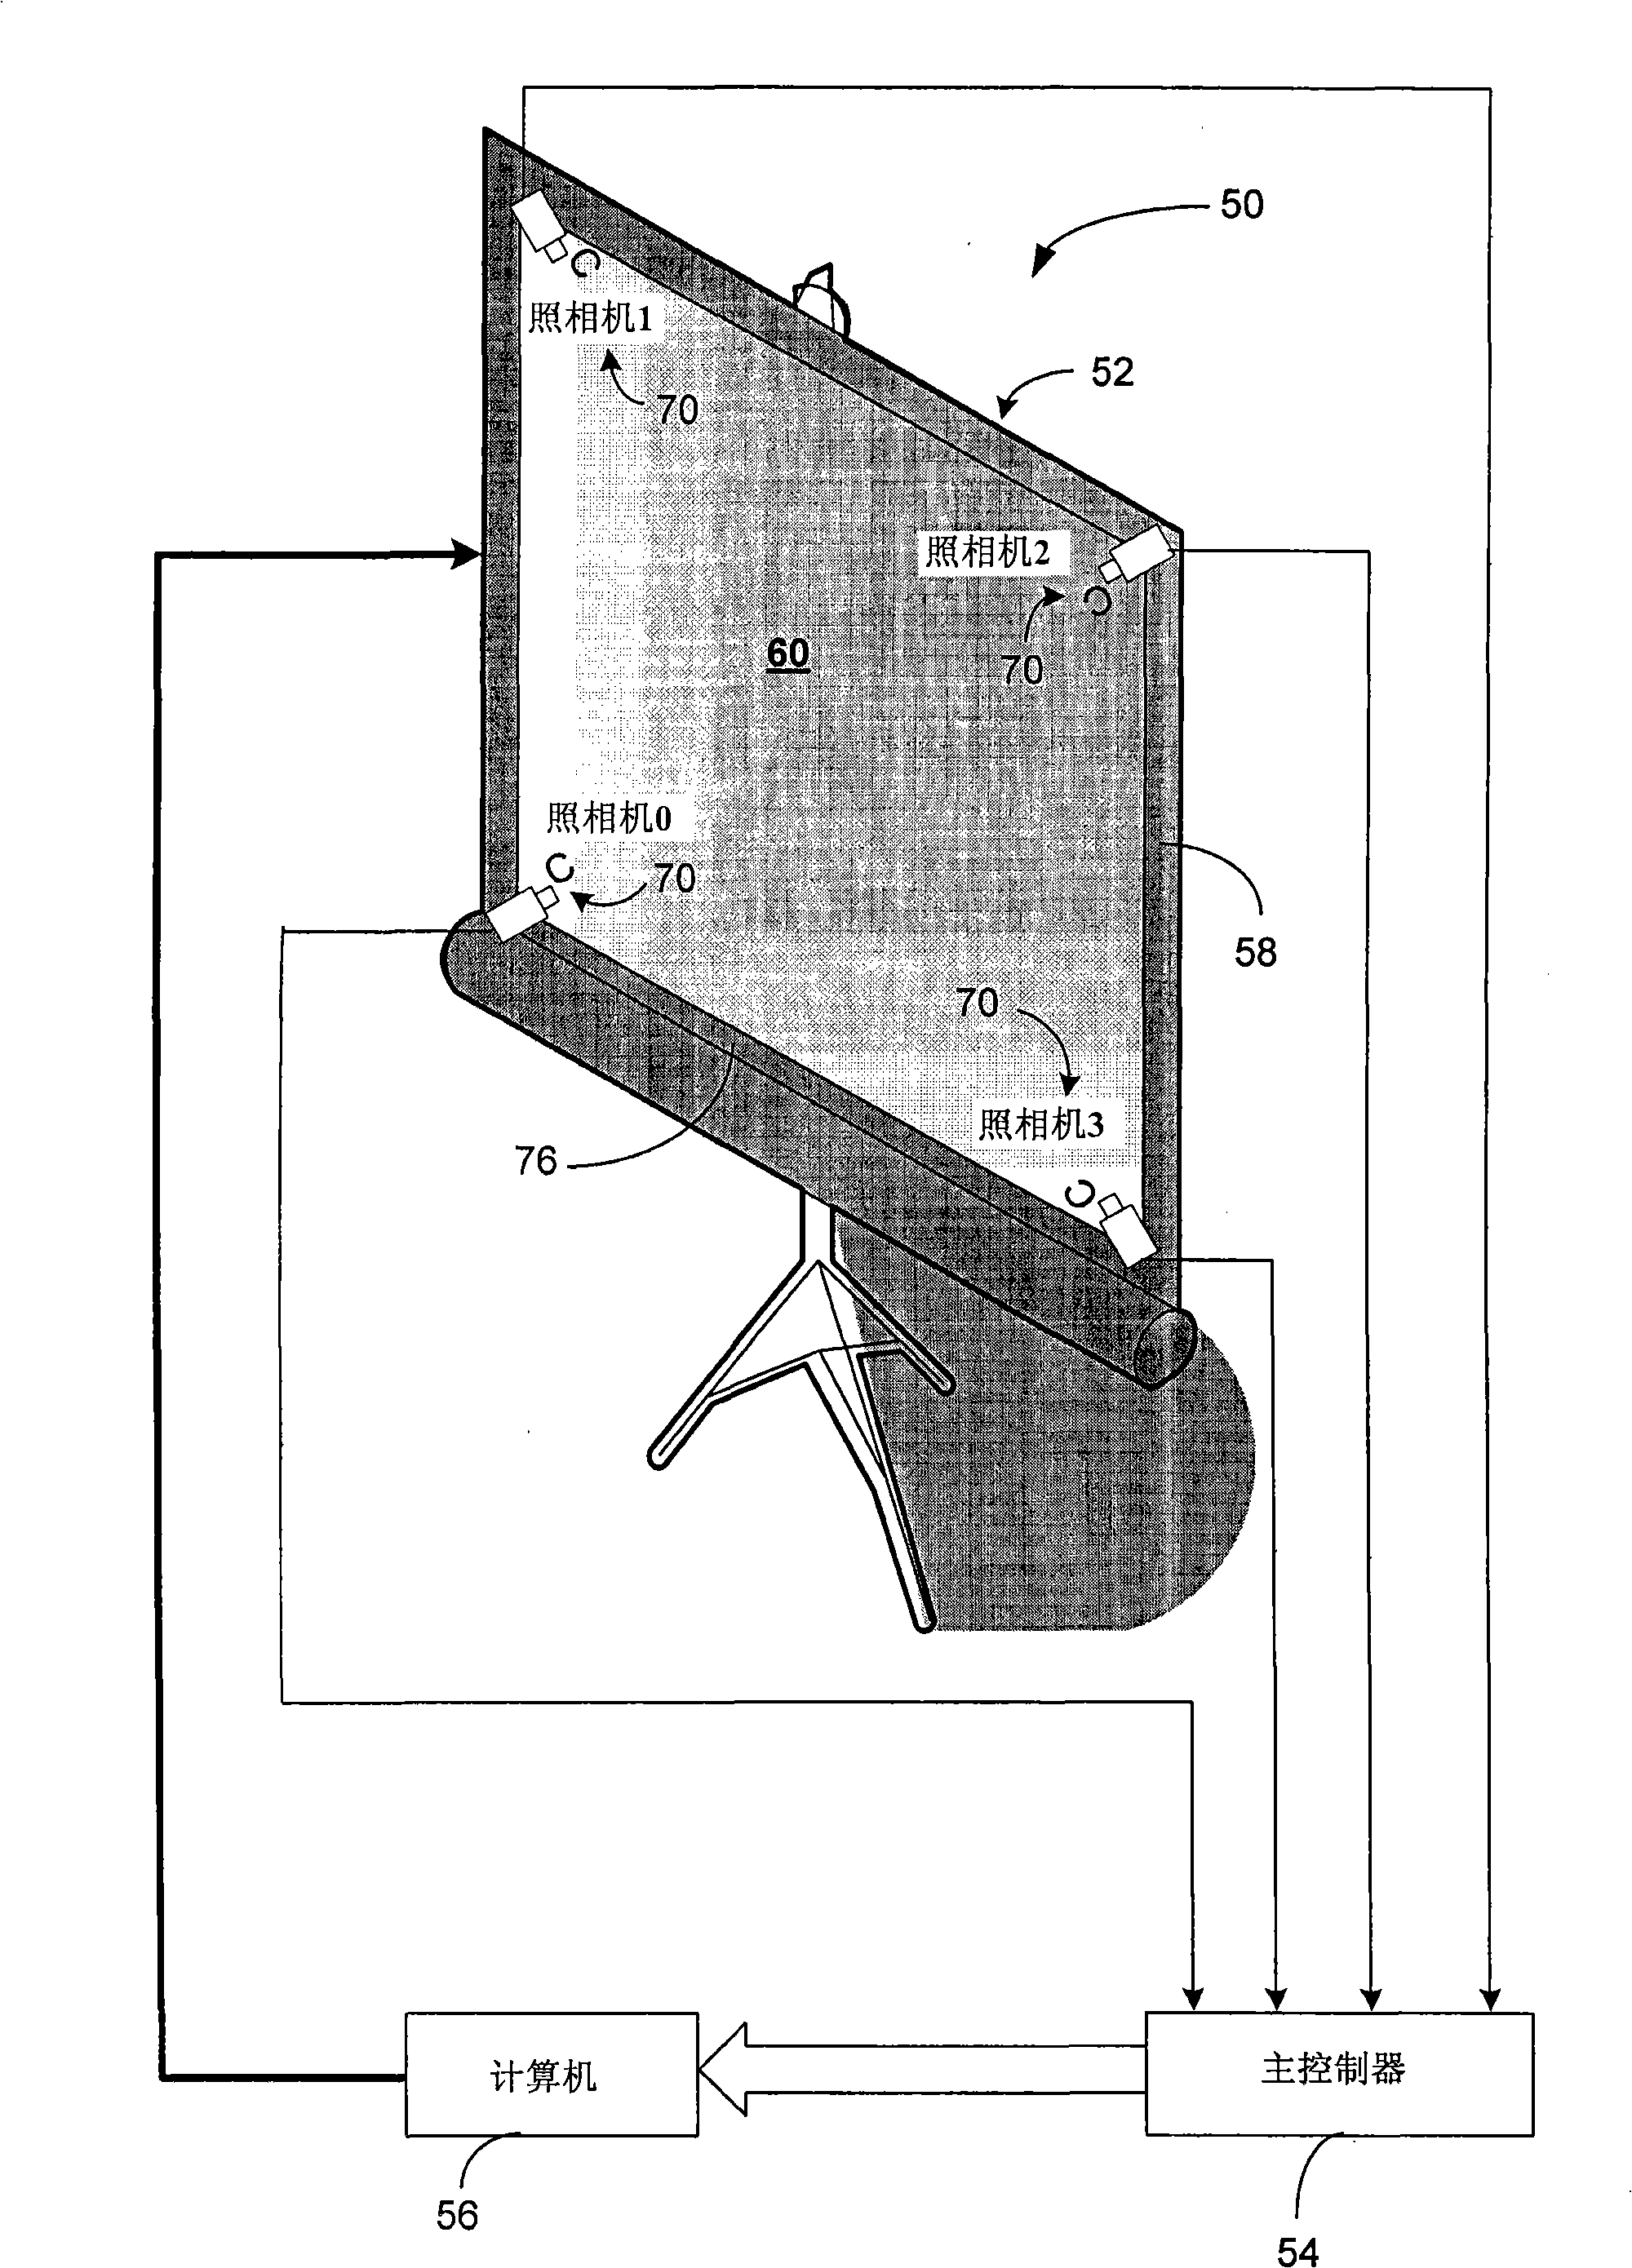 System and method for managing media data in a presentation system